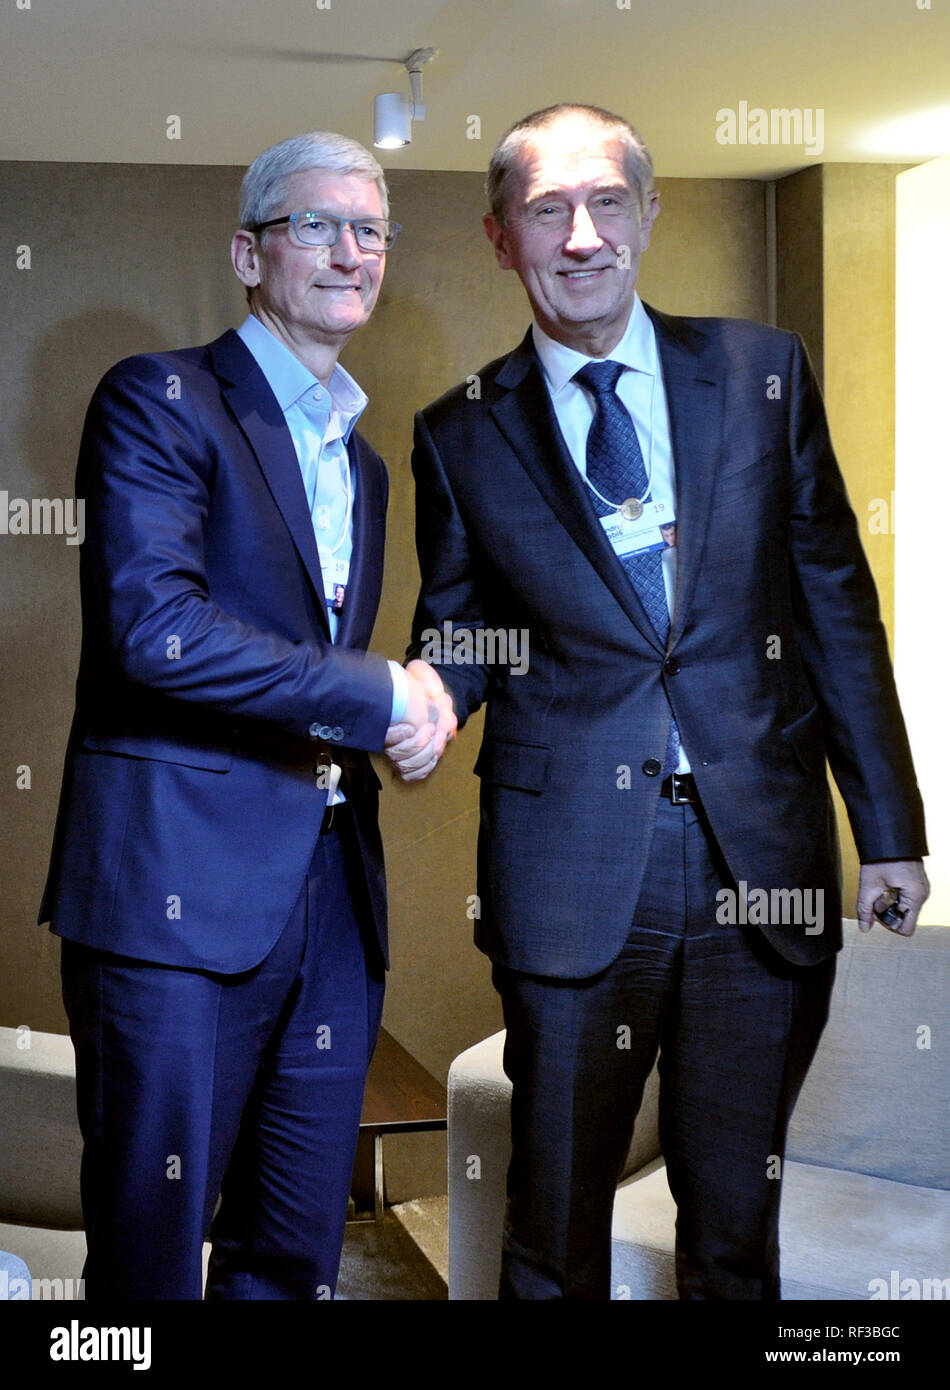 Davos, Switzerland. 24th Jan, 2019. Czech Prime Minister Andrej Babis  (right) meet with CEO of the Apple company Tim Cook (left) within the World  Economic Forum in Davos, Switzerland, on January 24,